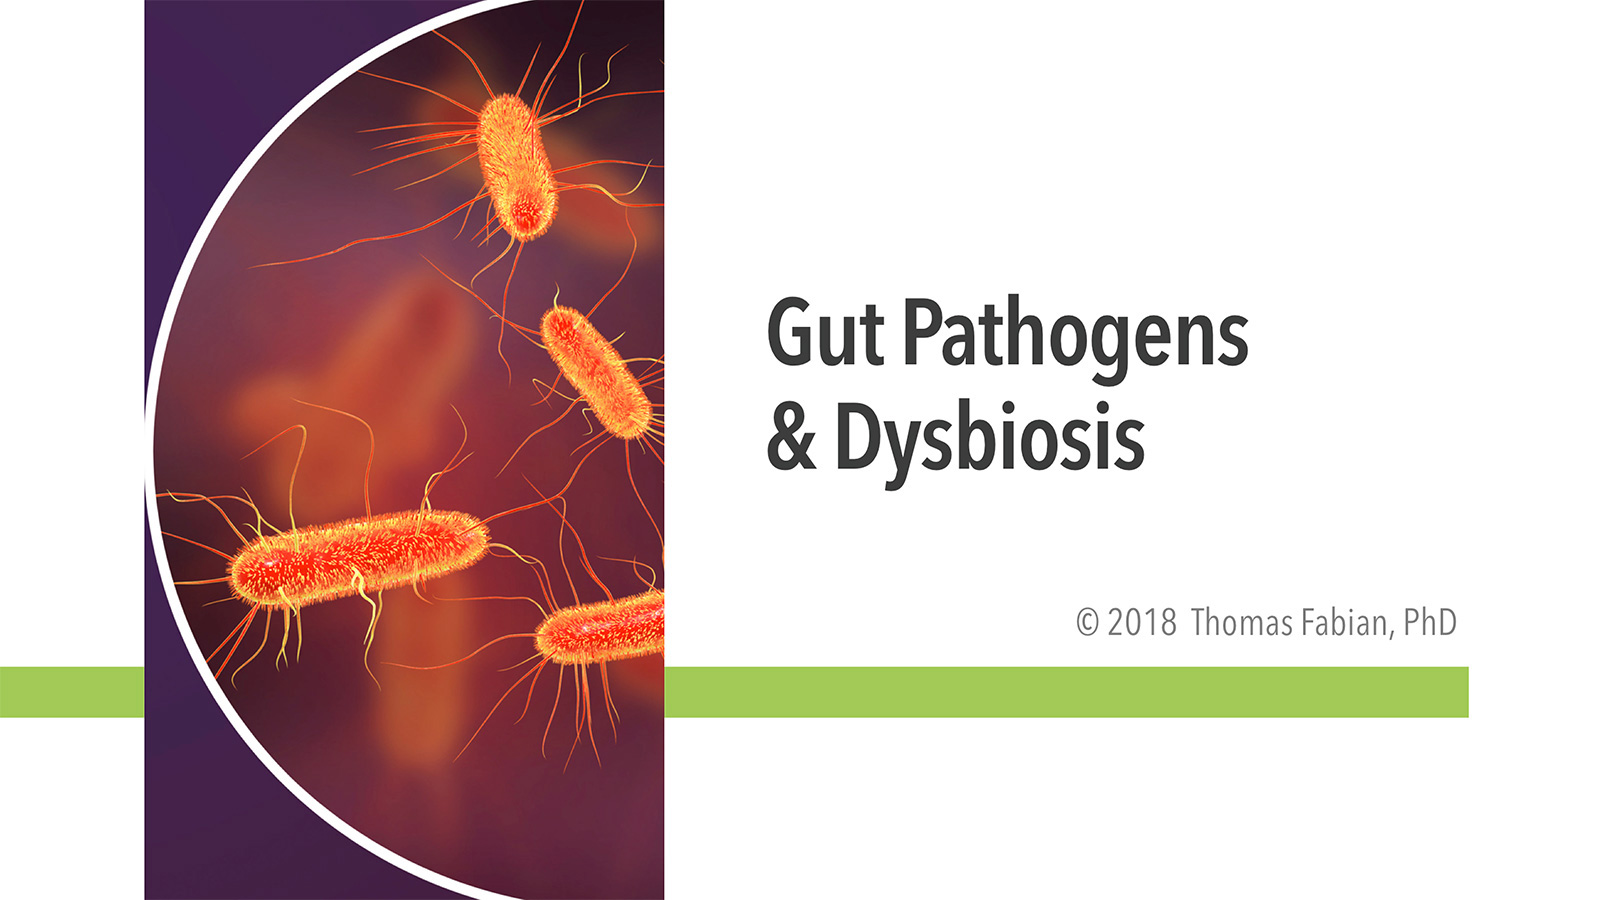 Gut Pathogens and Dysbiosis Course